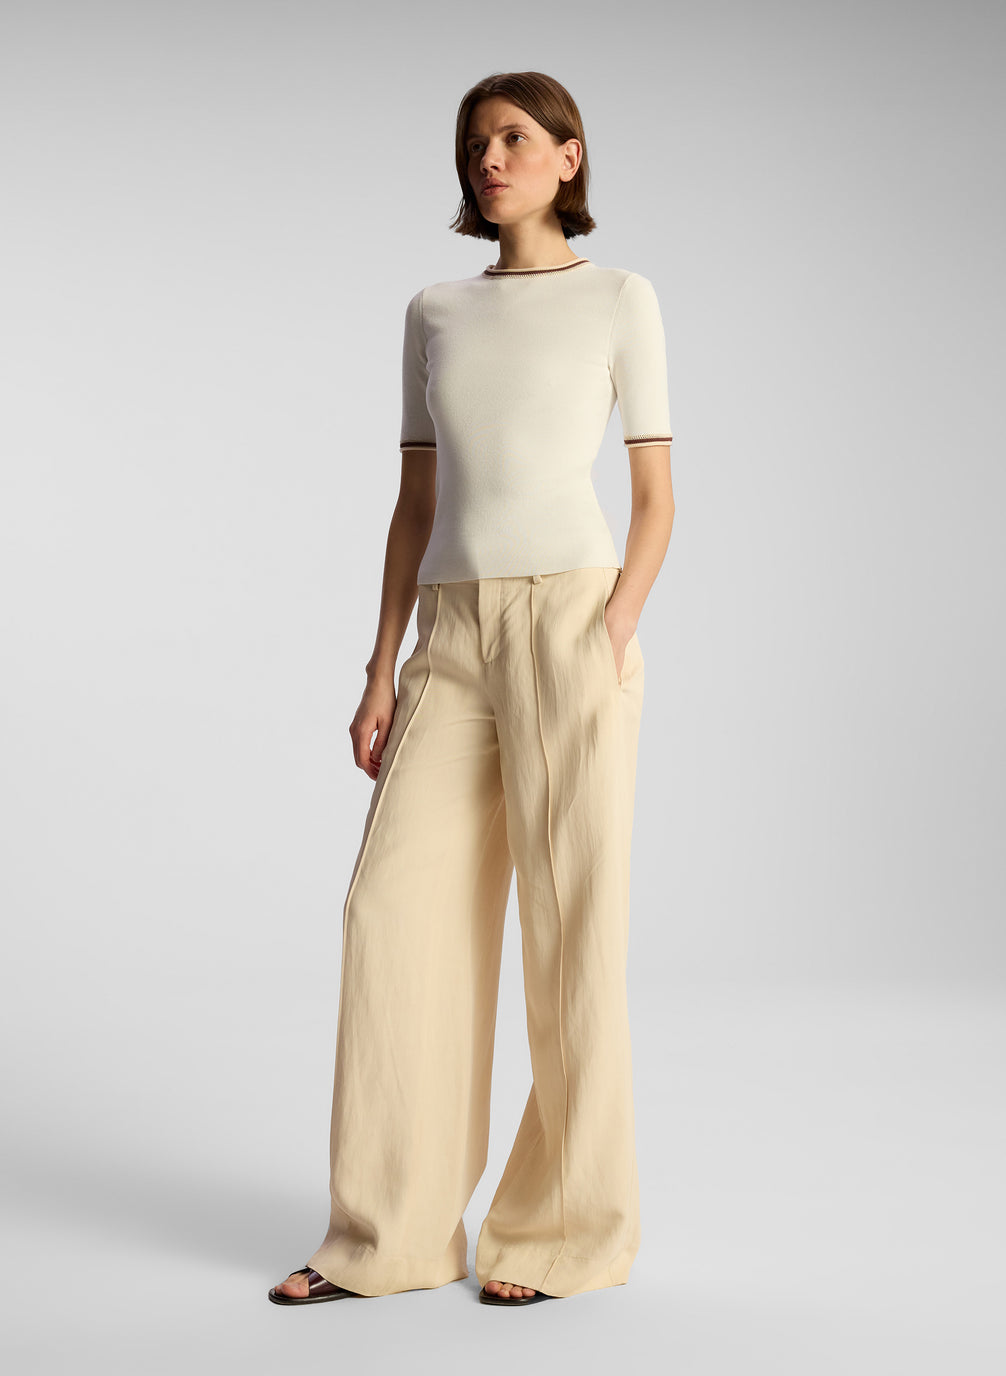 side  view of woman wearing white top and beige pants